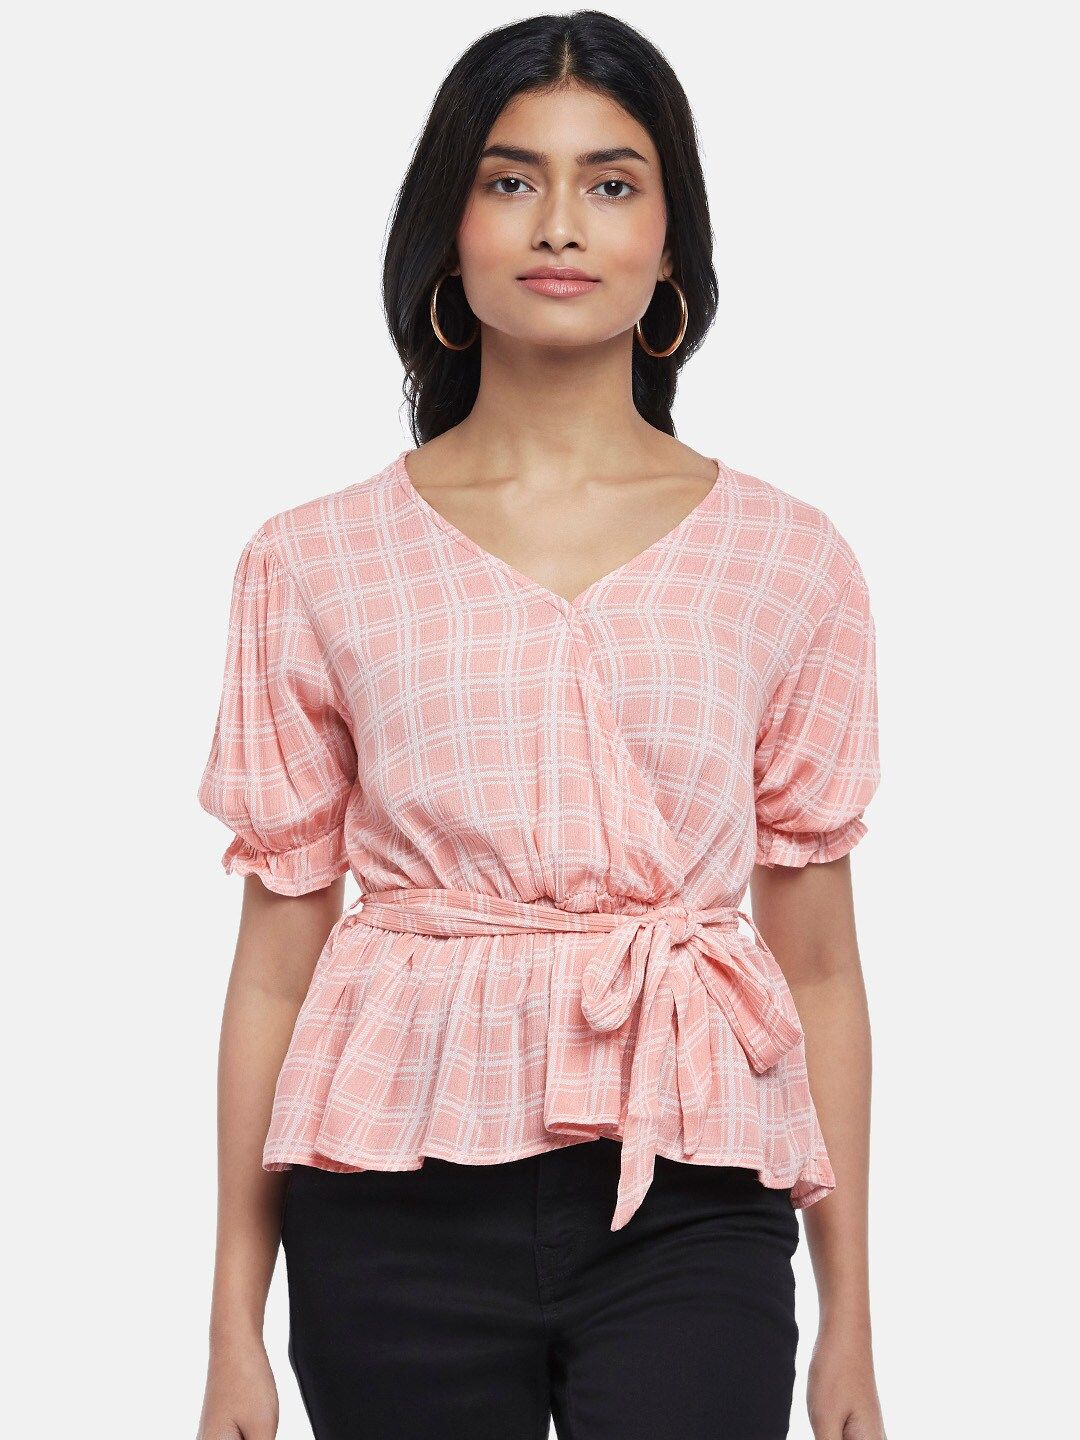 Honey by Pantaloons Women Peach-Coloured & White Checked Cinched Waist Top Price in India